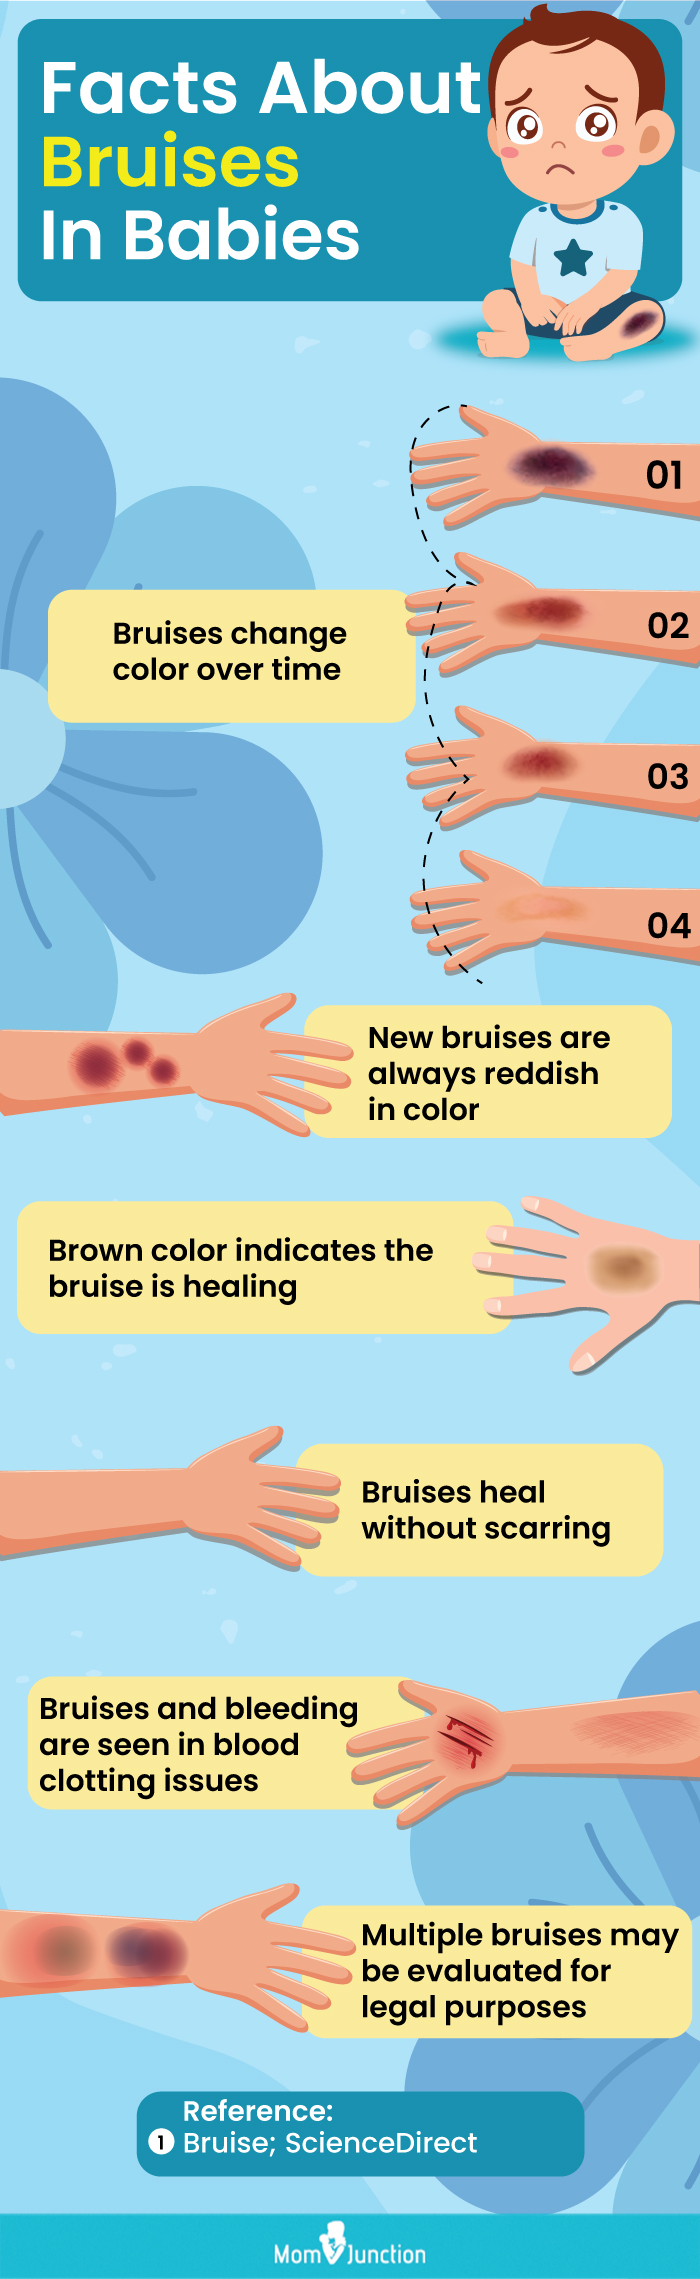 facts about bruises in babies (infographic)